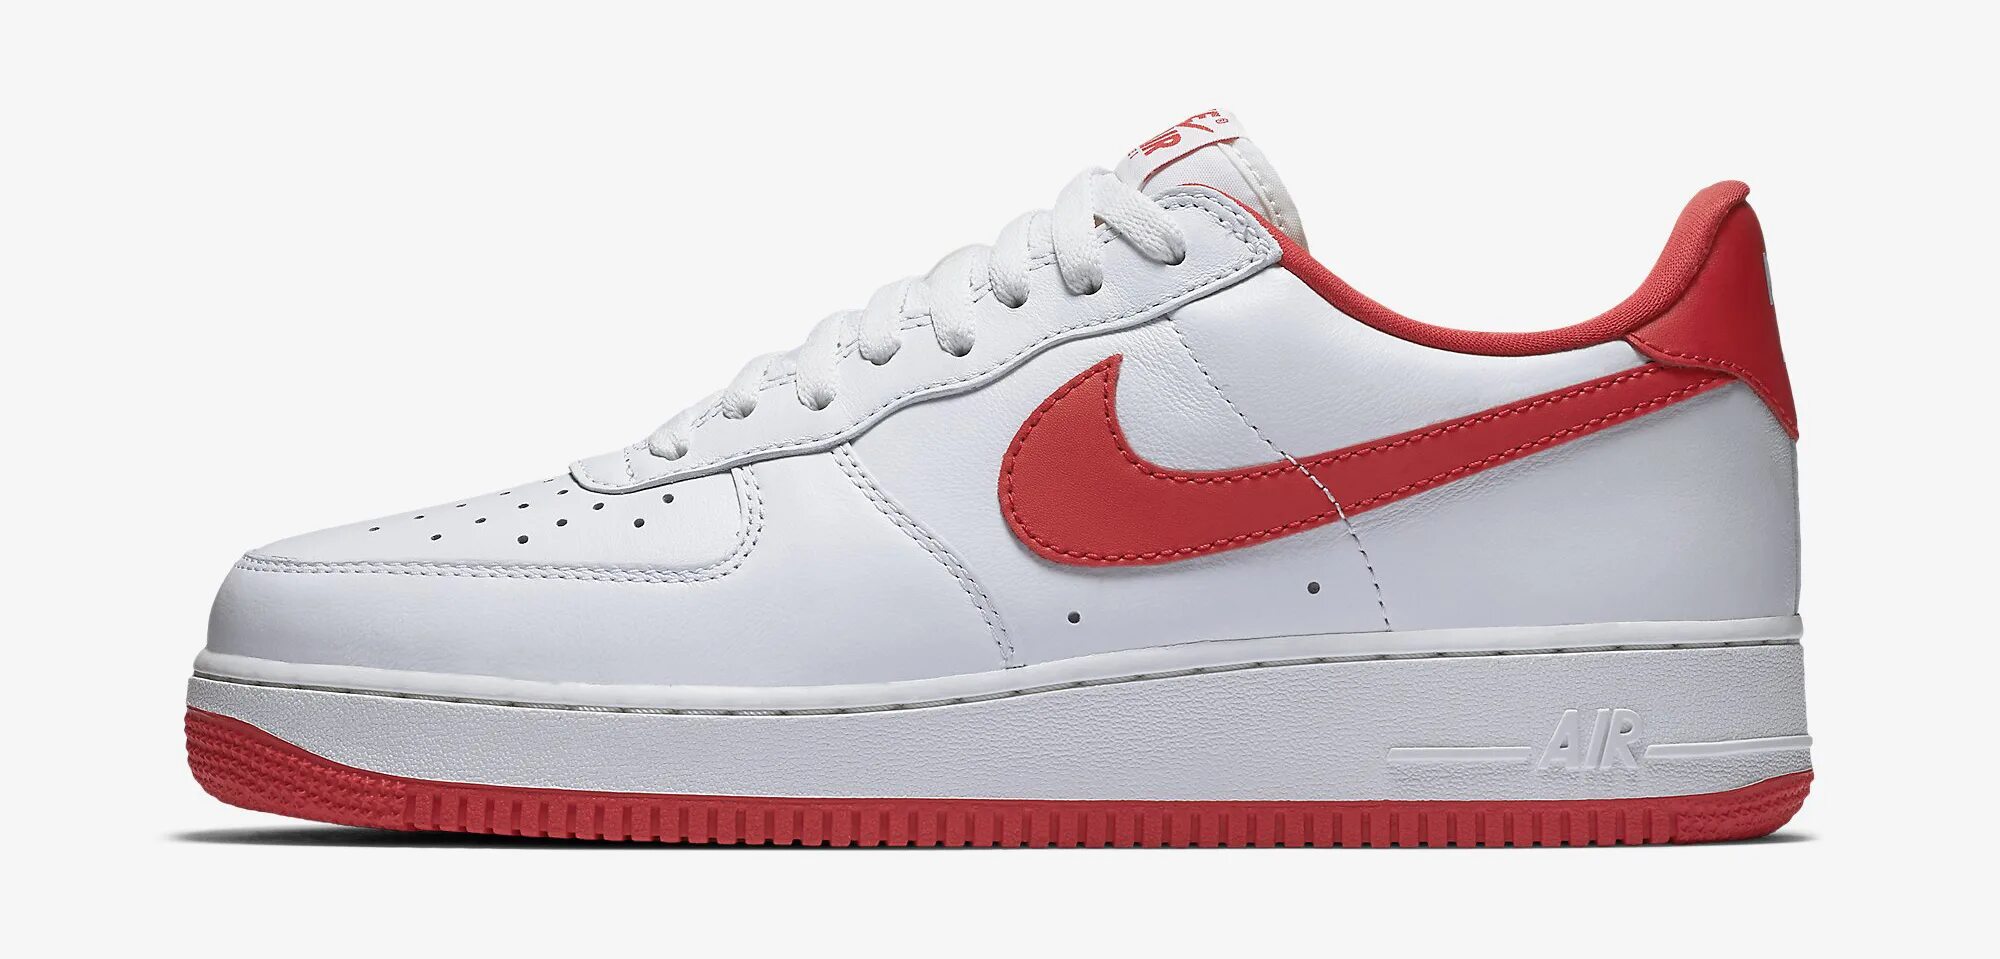 Og 1. Nike Air Force 1 White Red. Nike Air Force 1 Low White. Nike Air Force Low White Red. Nike Air Force 1 Patriots.